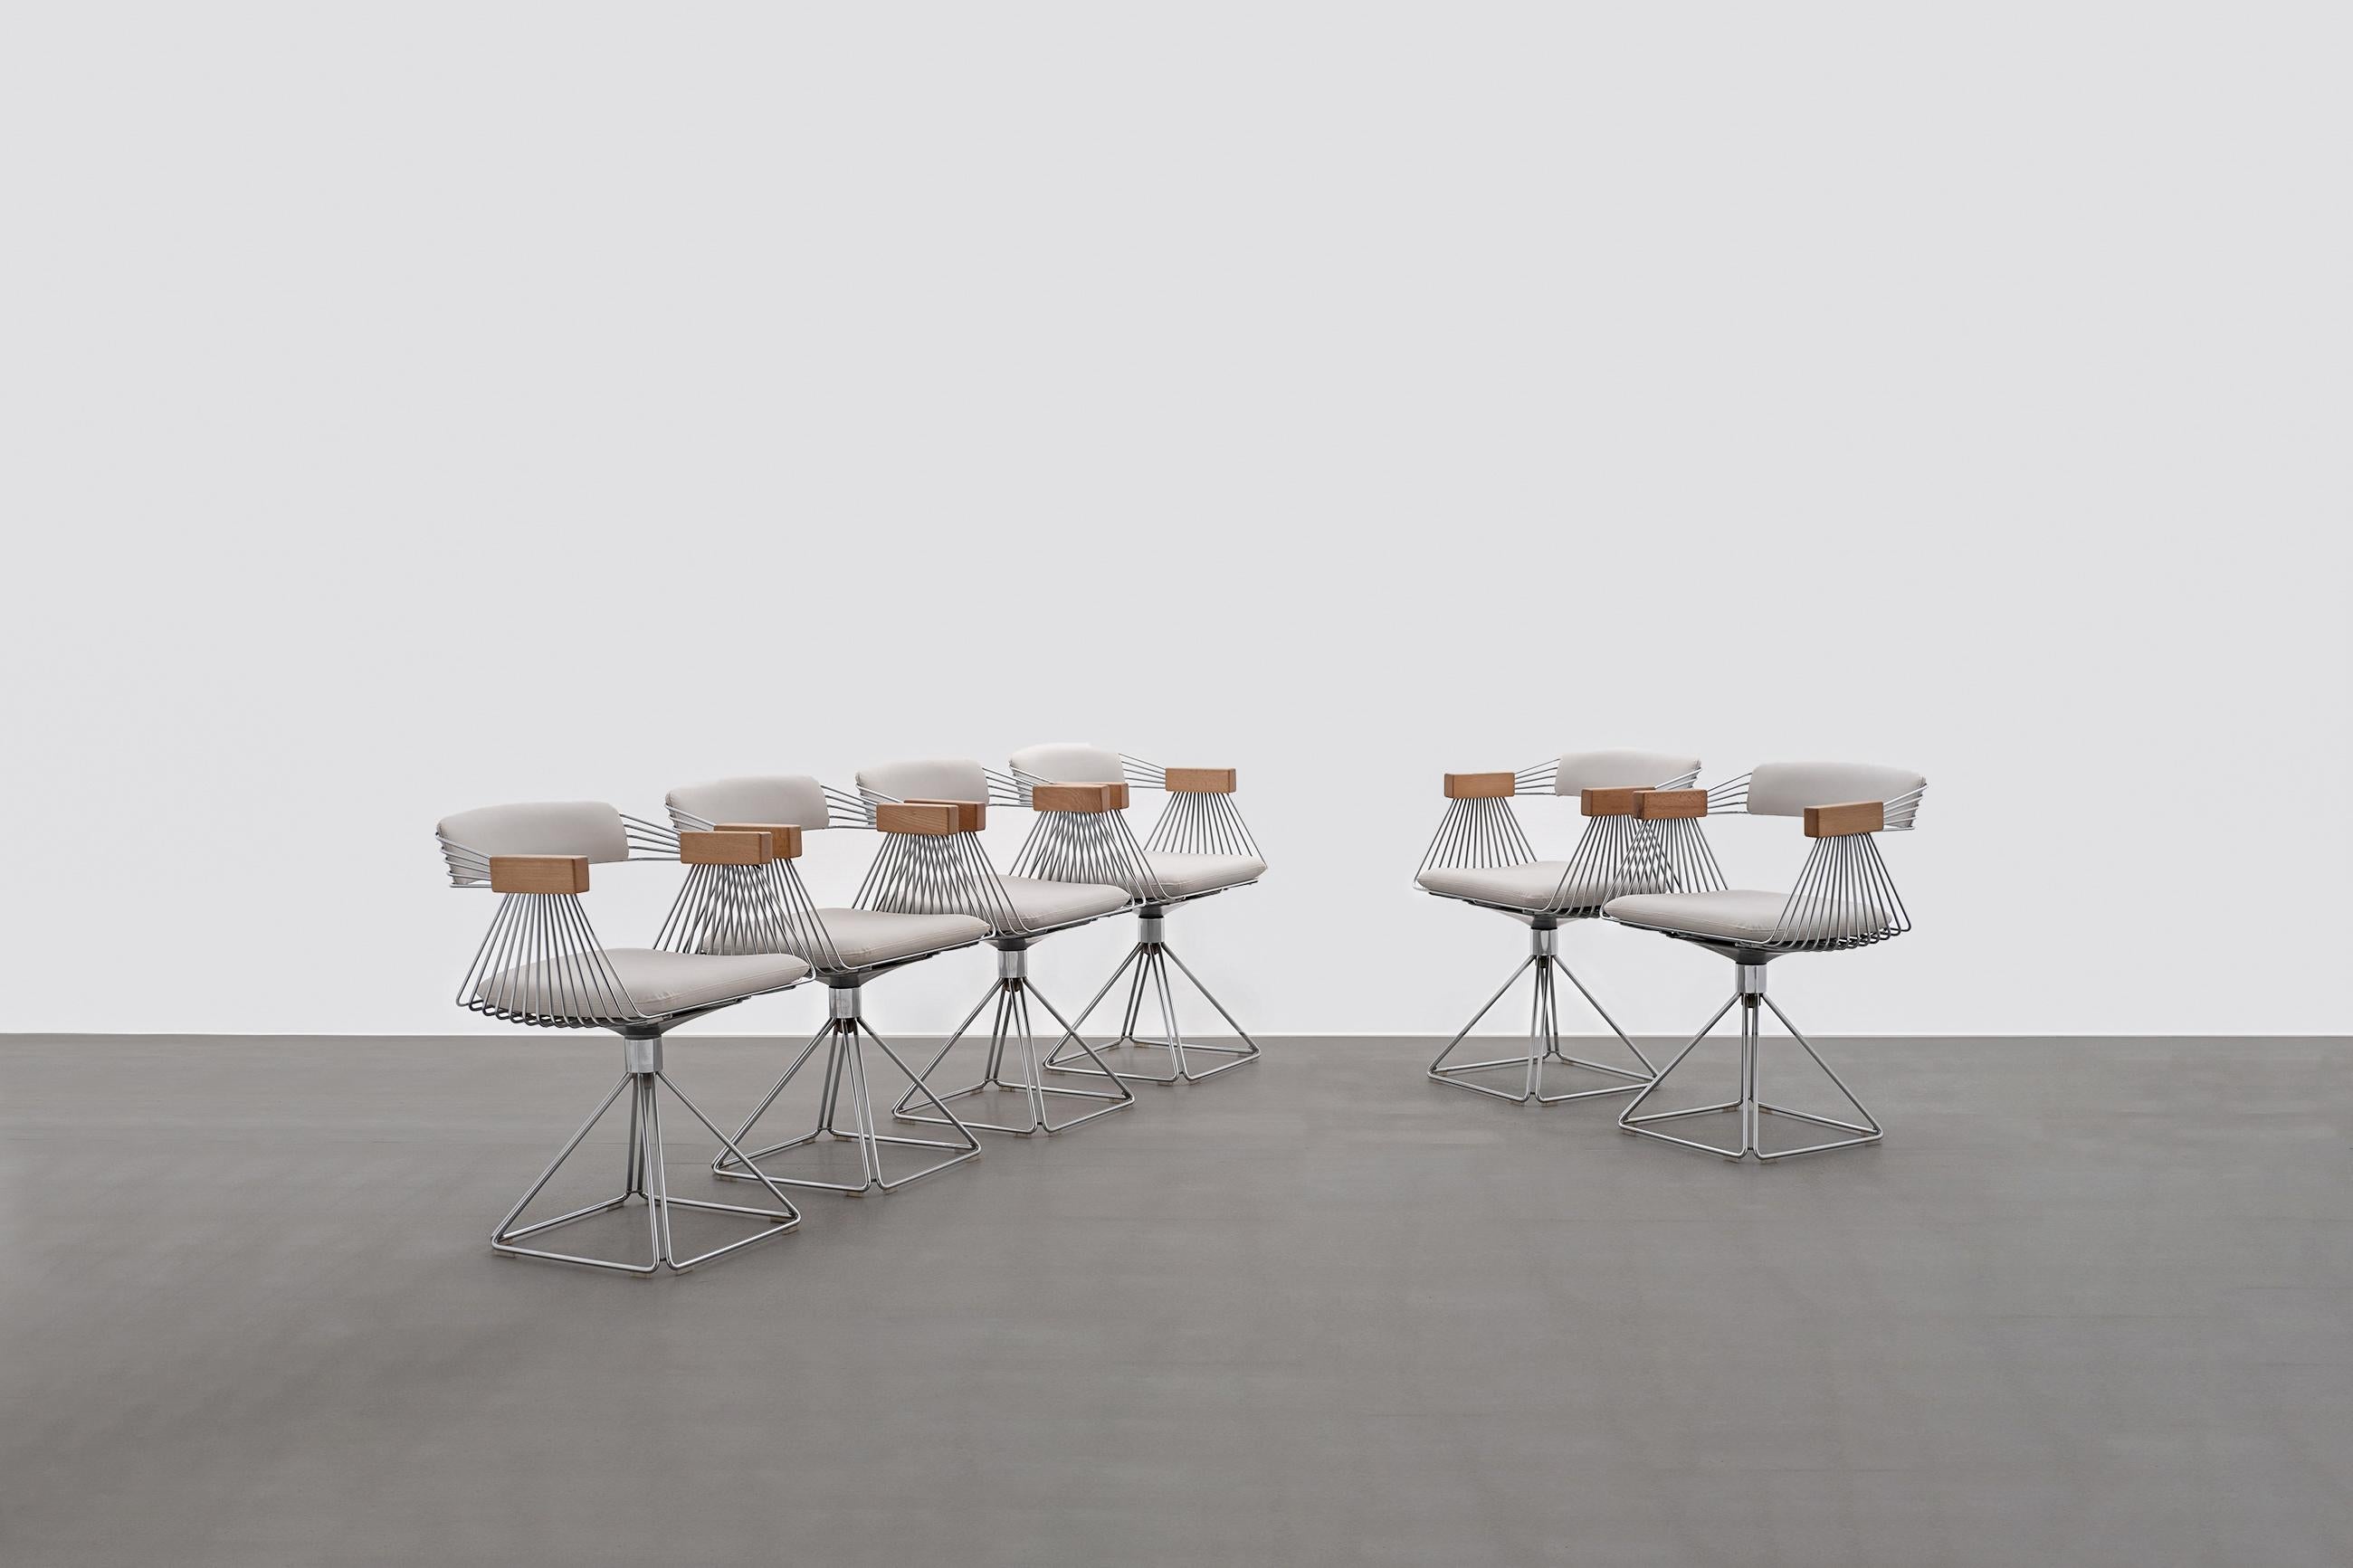 Set of six ‘Delta’ dinging or office chairs by Rudi Verelst for Novalux, Belgium, 1971.
Constructed of chromed metal wires on a thick metal wire chromed pyramid shaped swivel base. Seating and backrest in white leatherette and nice beech wooden